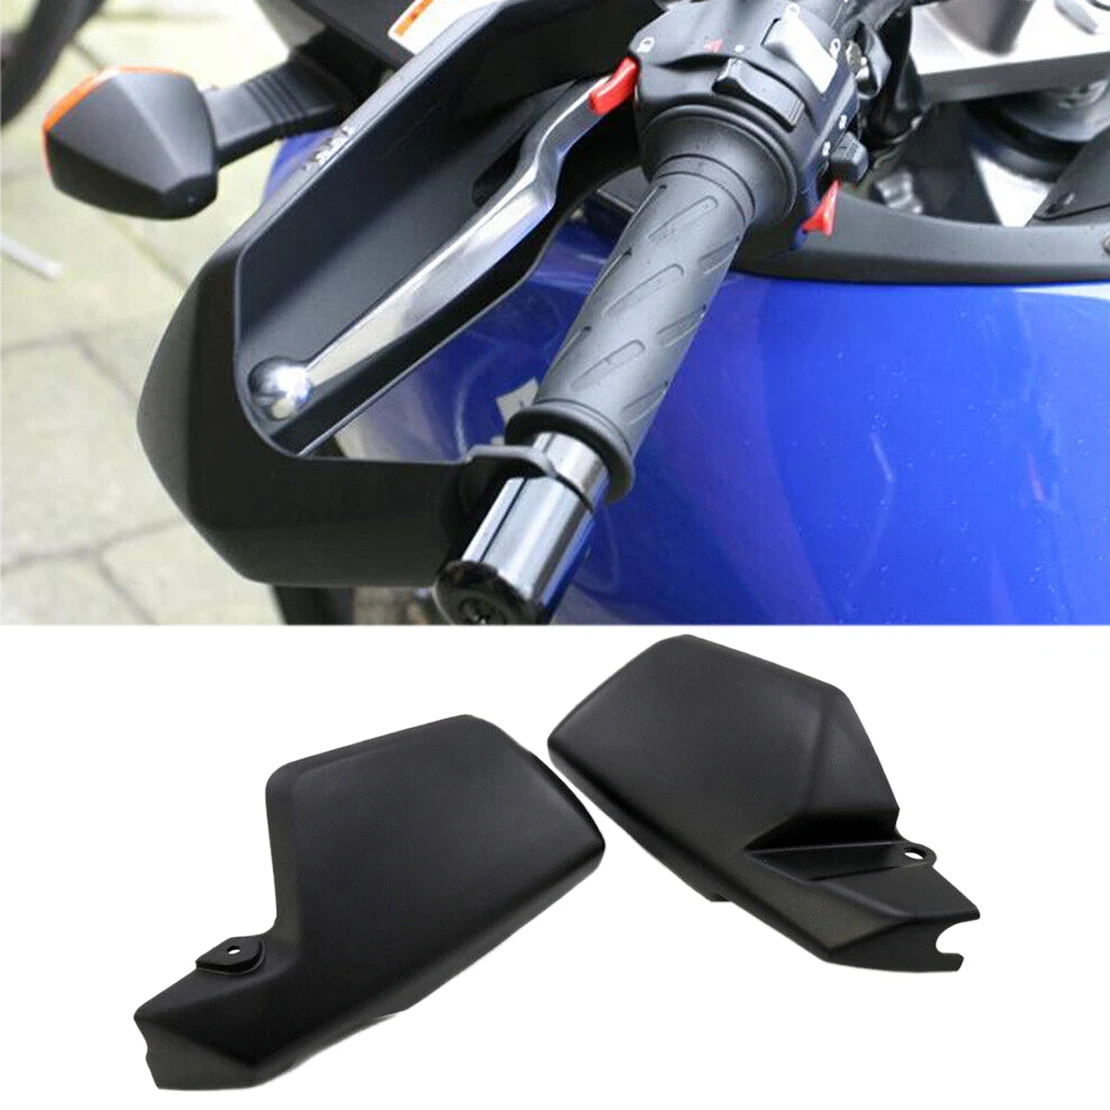 

1 Pair Motorcycle Hand Knuckle Guards Handguard Shield Protector Fit for Suzuki V-strom DL650 2004-2016 2017 2018 2019 2020 2021